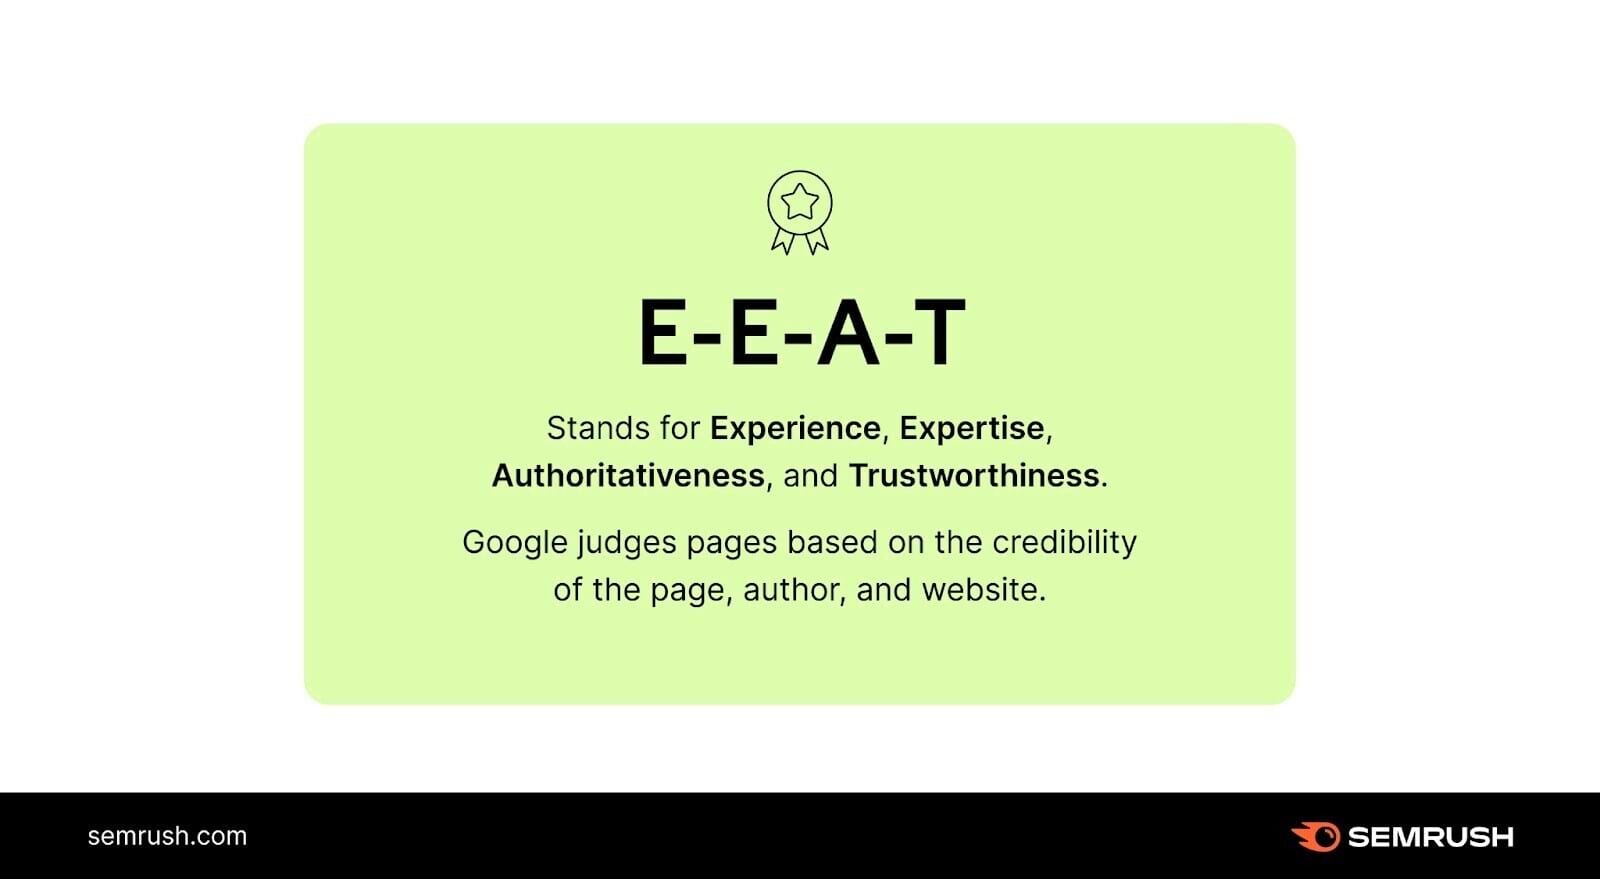 An infographic explaining what E-E-A-T stands for